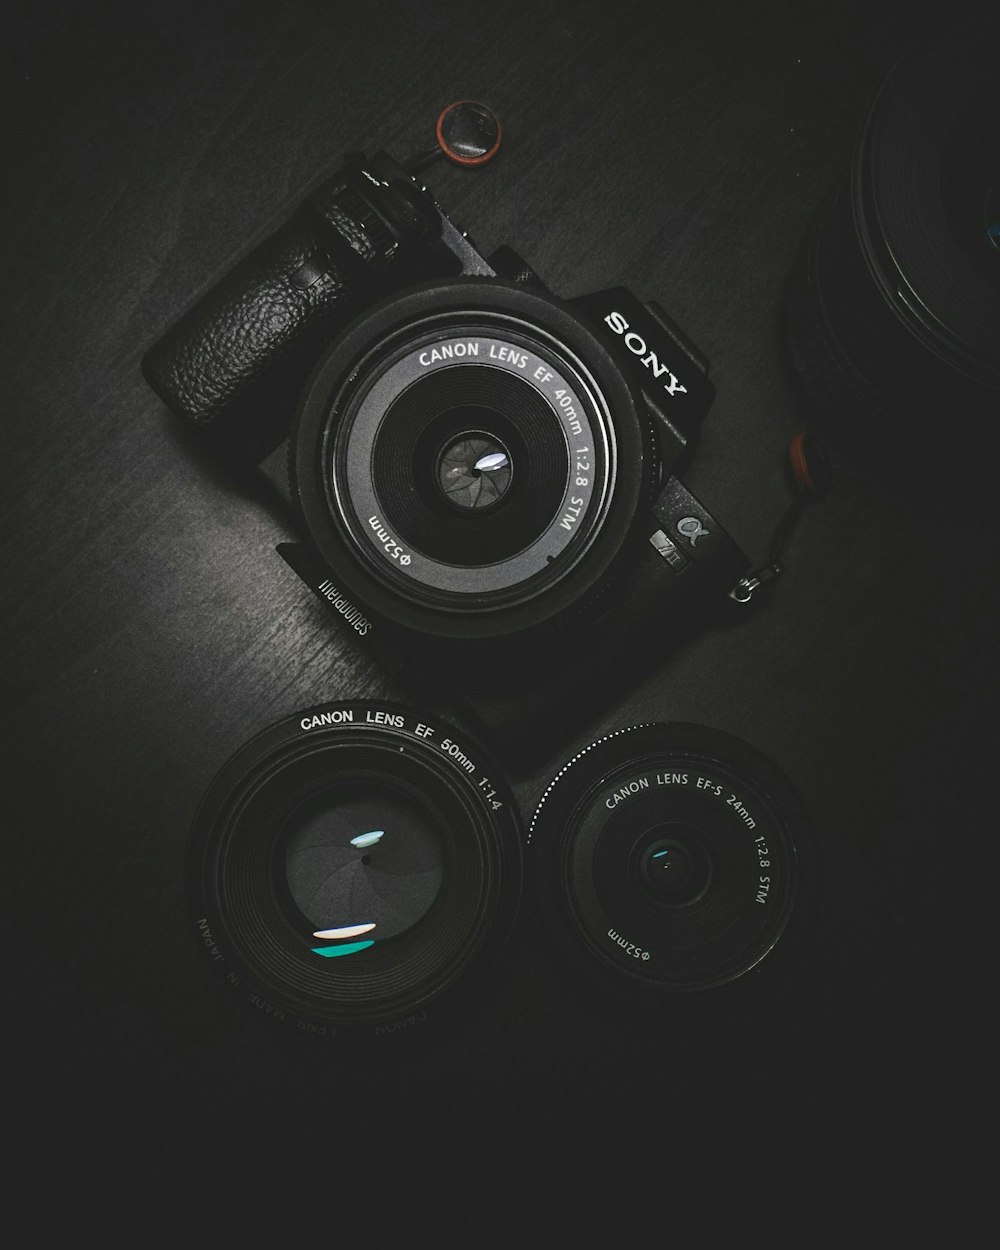 999+ Sony Camera Pictures  Download Free Images on Unsplash